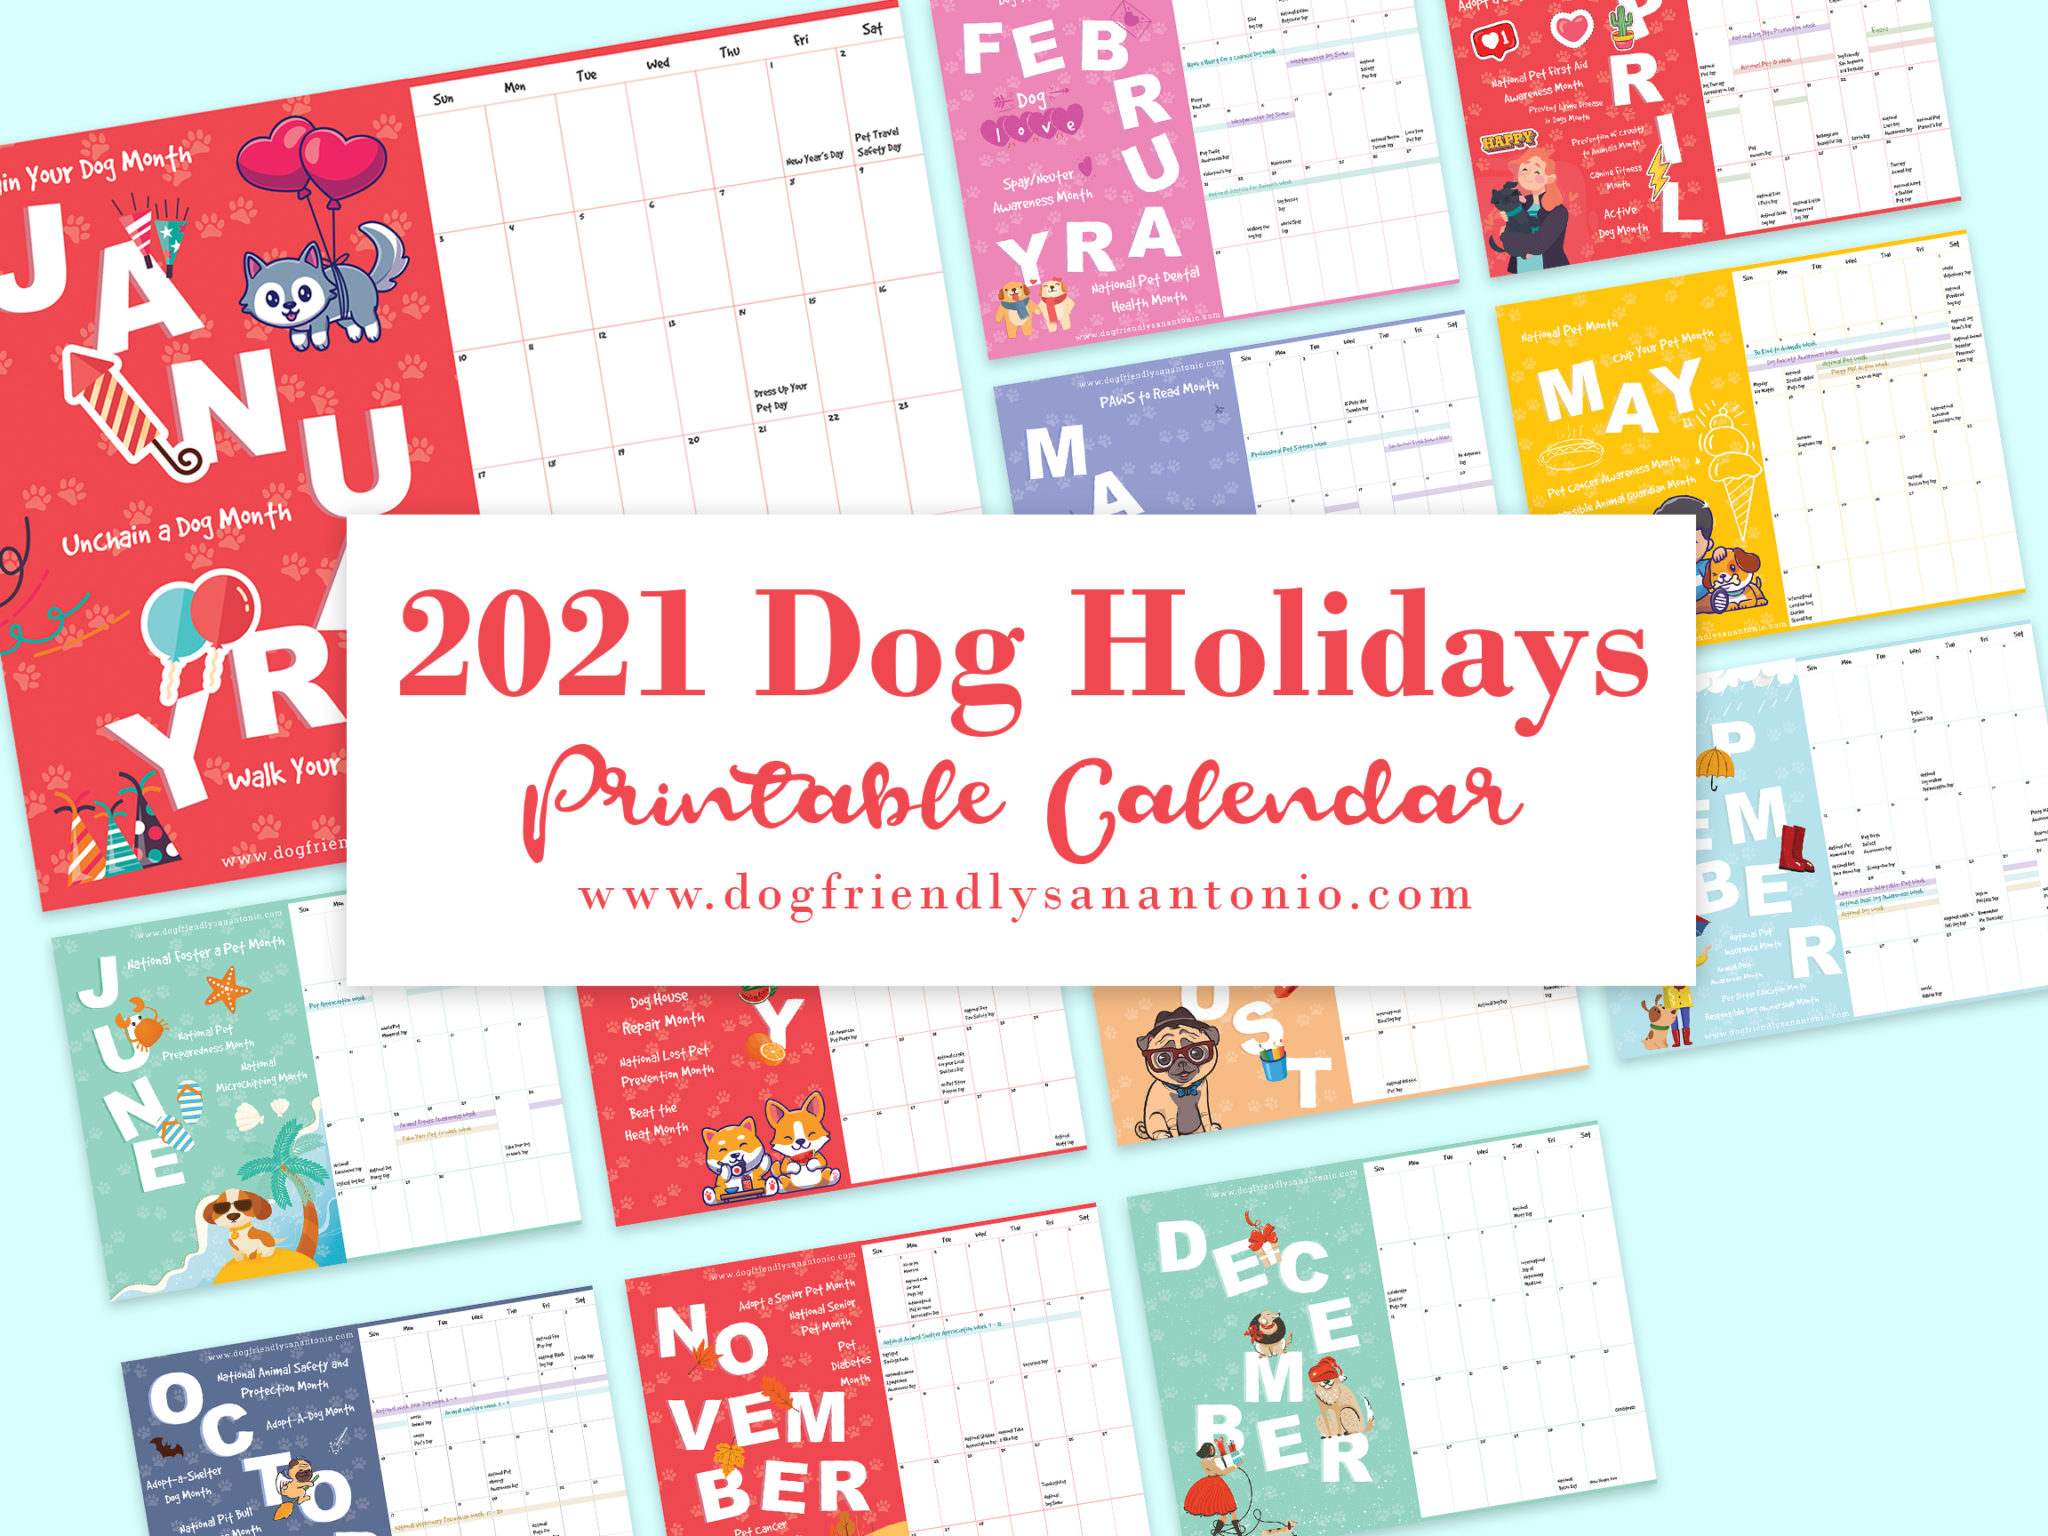 2021 dog holidays text with images of printable calendar in background